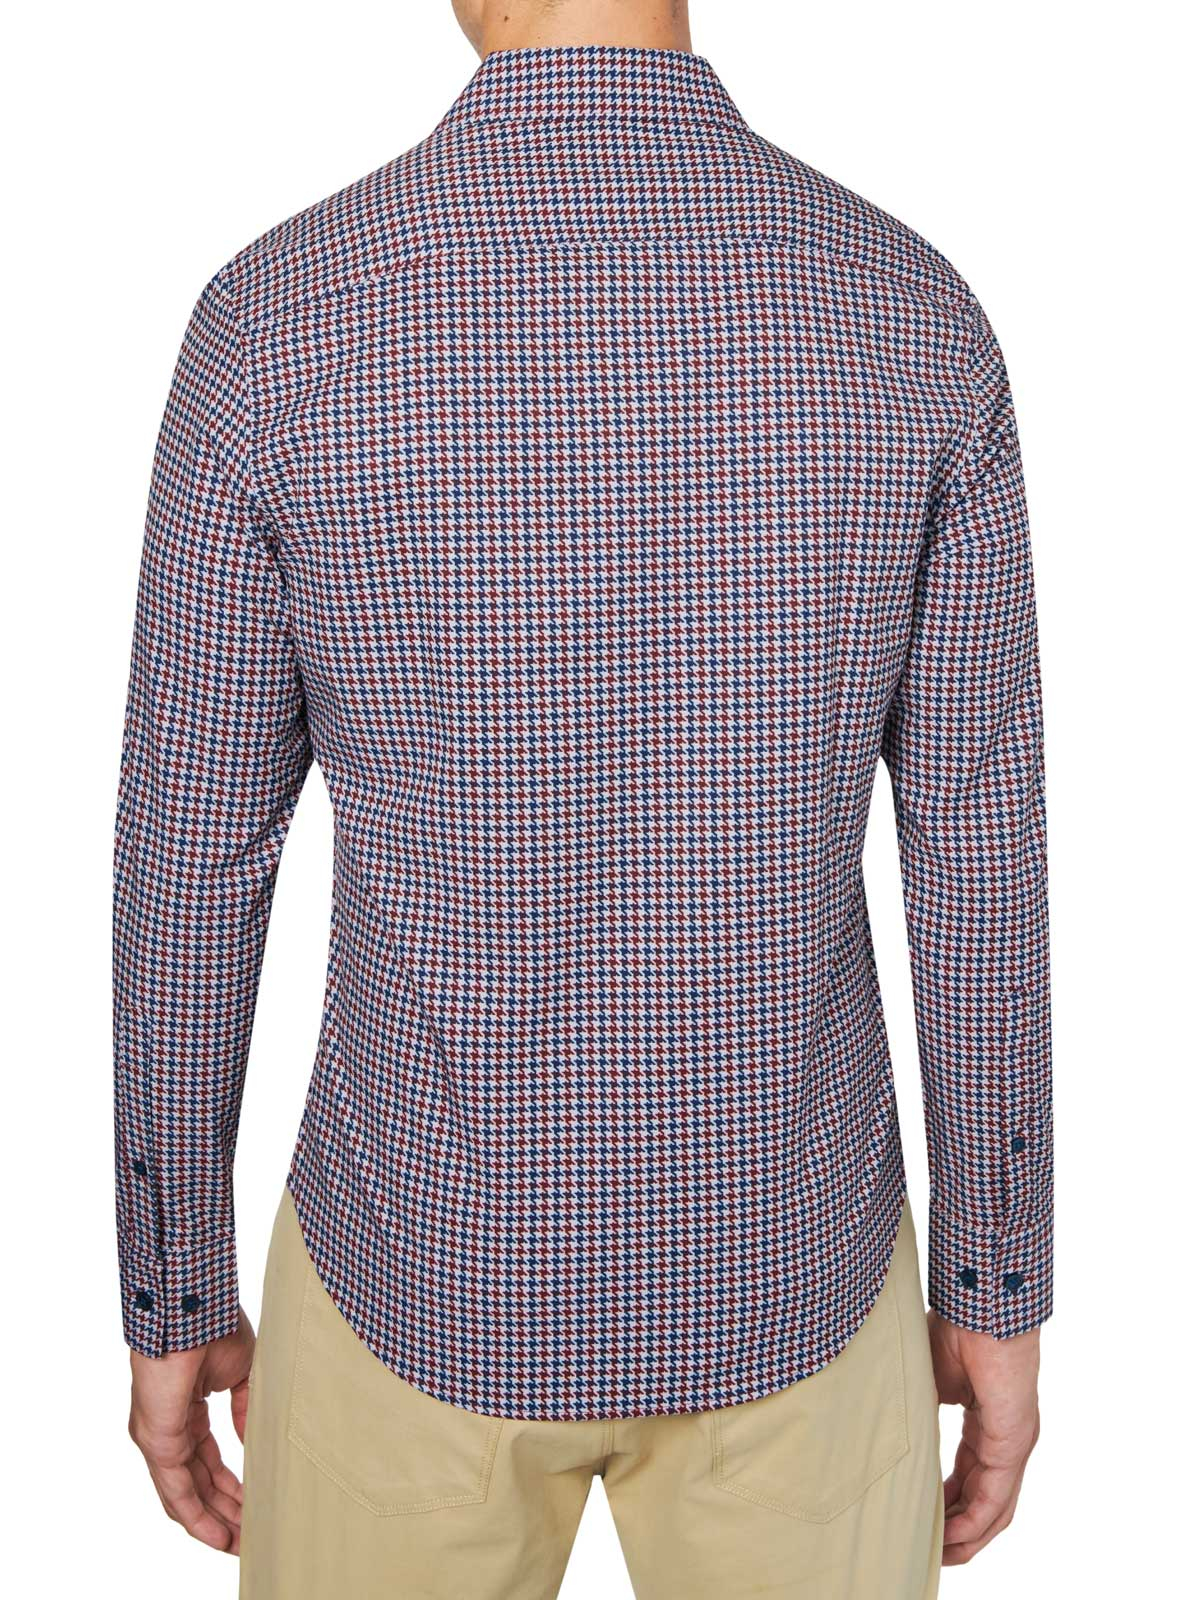 HOUNDSTOOTH PERFORMANCE STRETCH LONG SLEEVE SHIRT